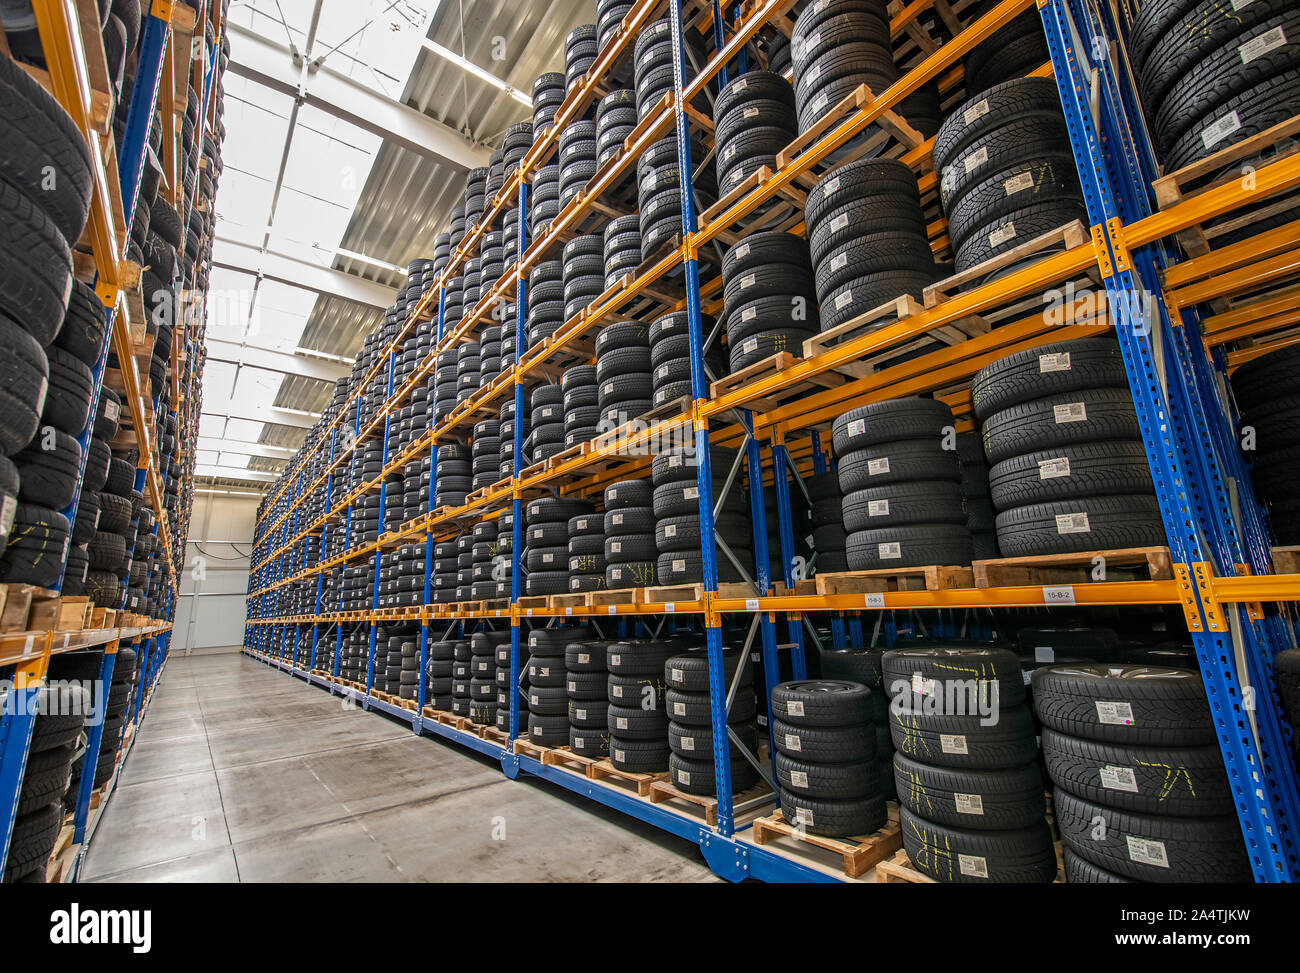 High rack with customer tires in warehouse of a tire dealer Stock Photo